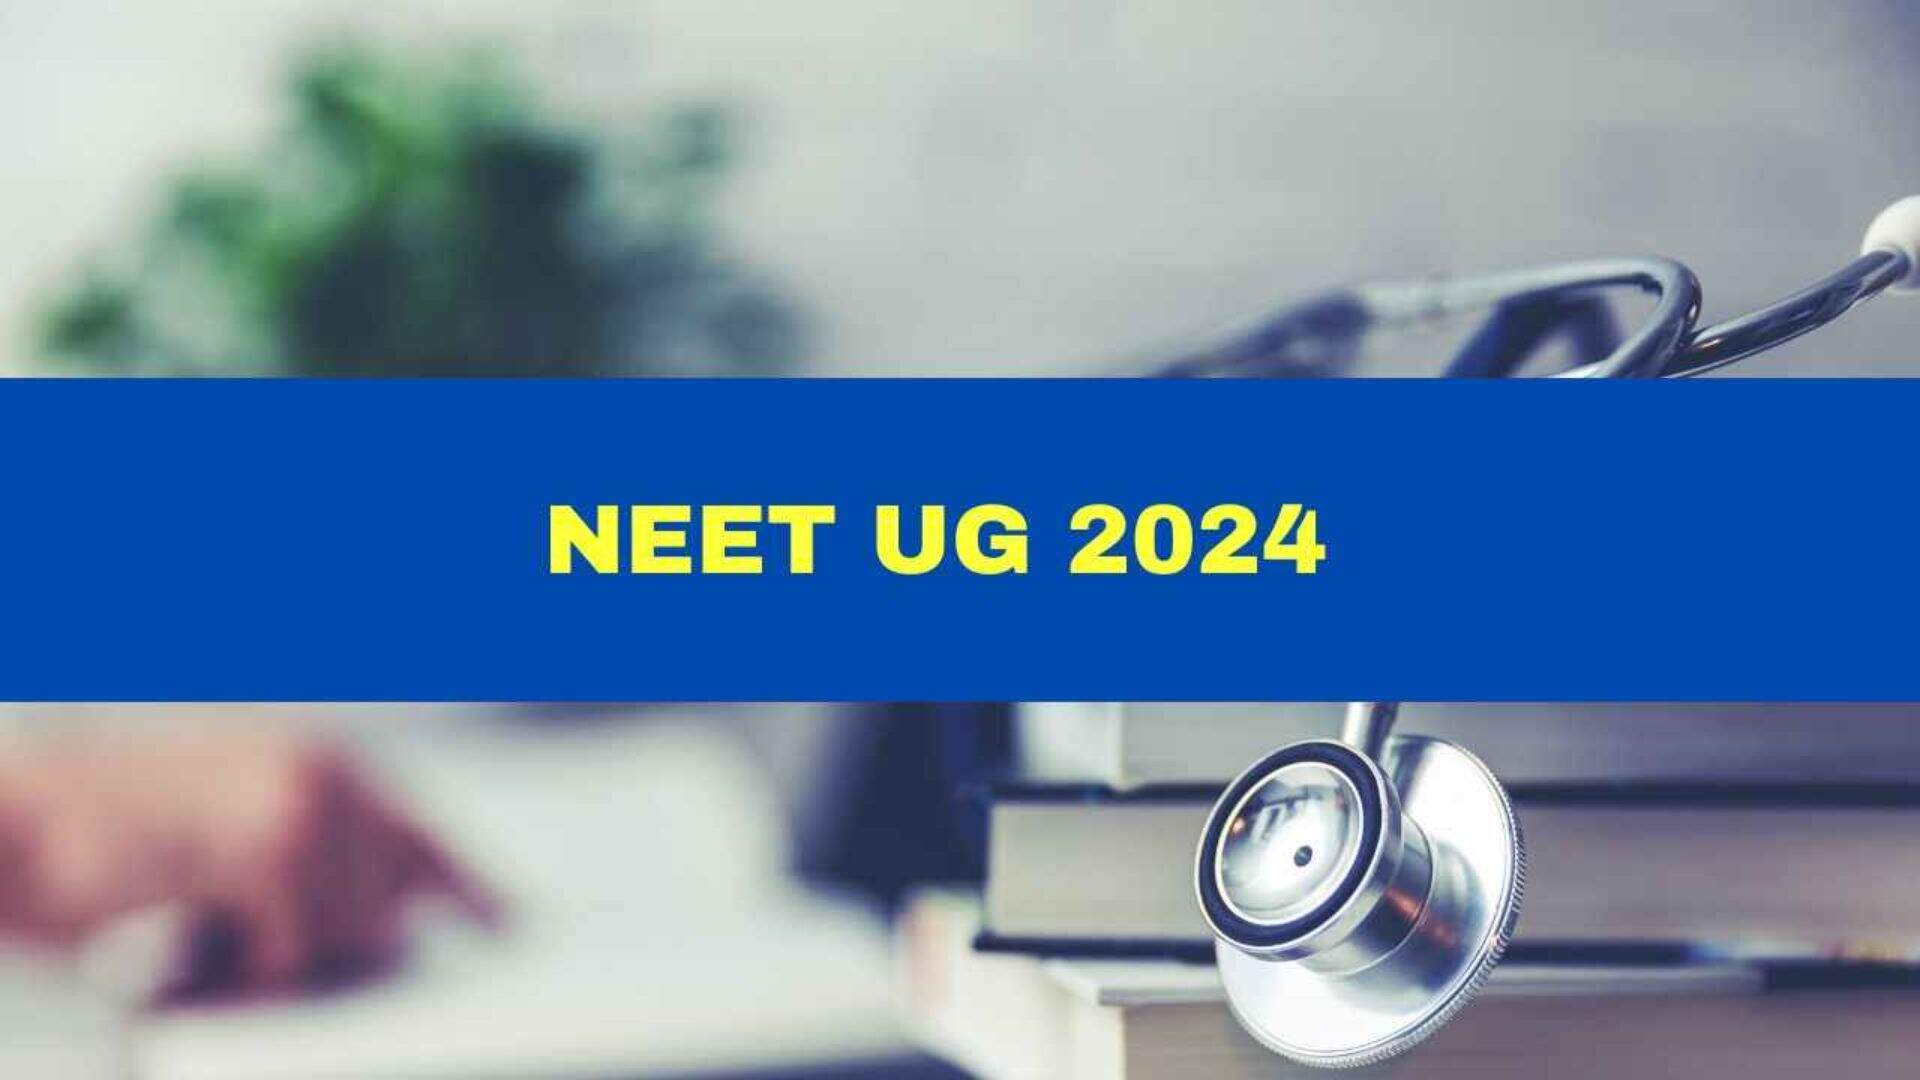 The National Testing Agency (NTA) has issued crucial guidelines for candidates preparing to take the NEET UG Exam 2024